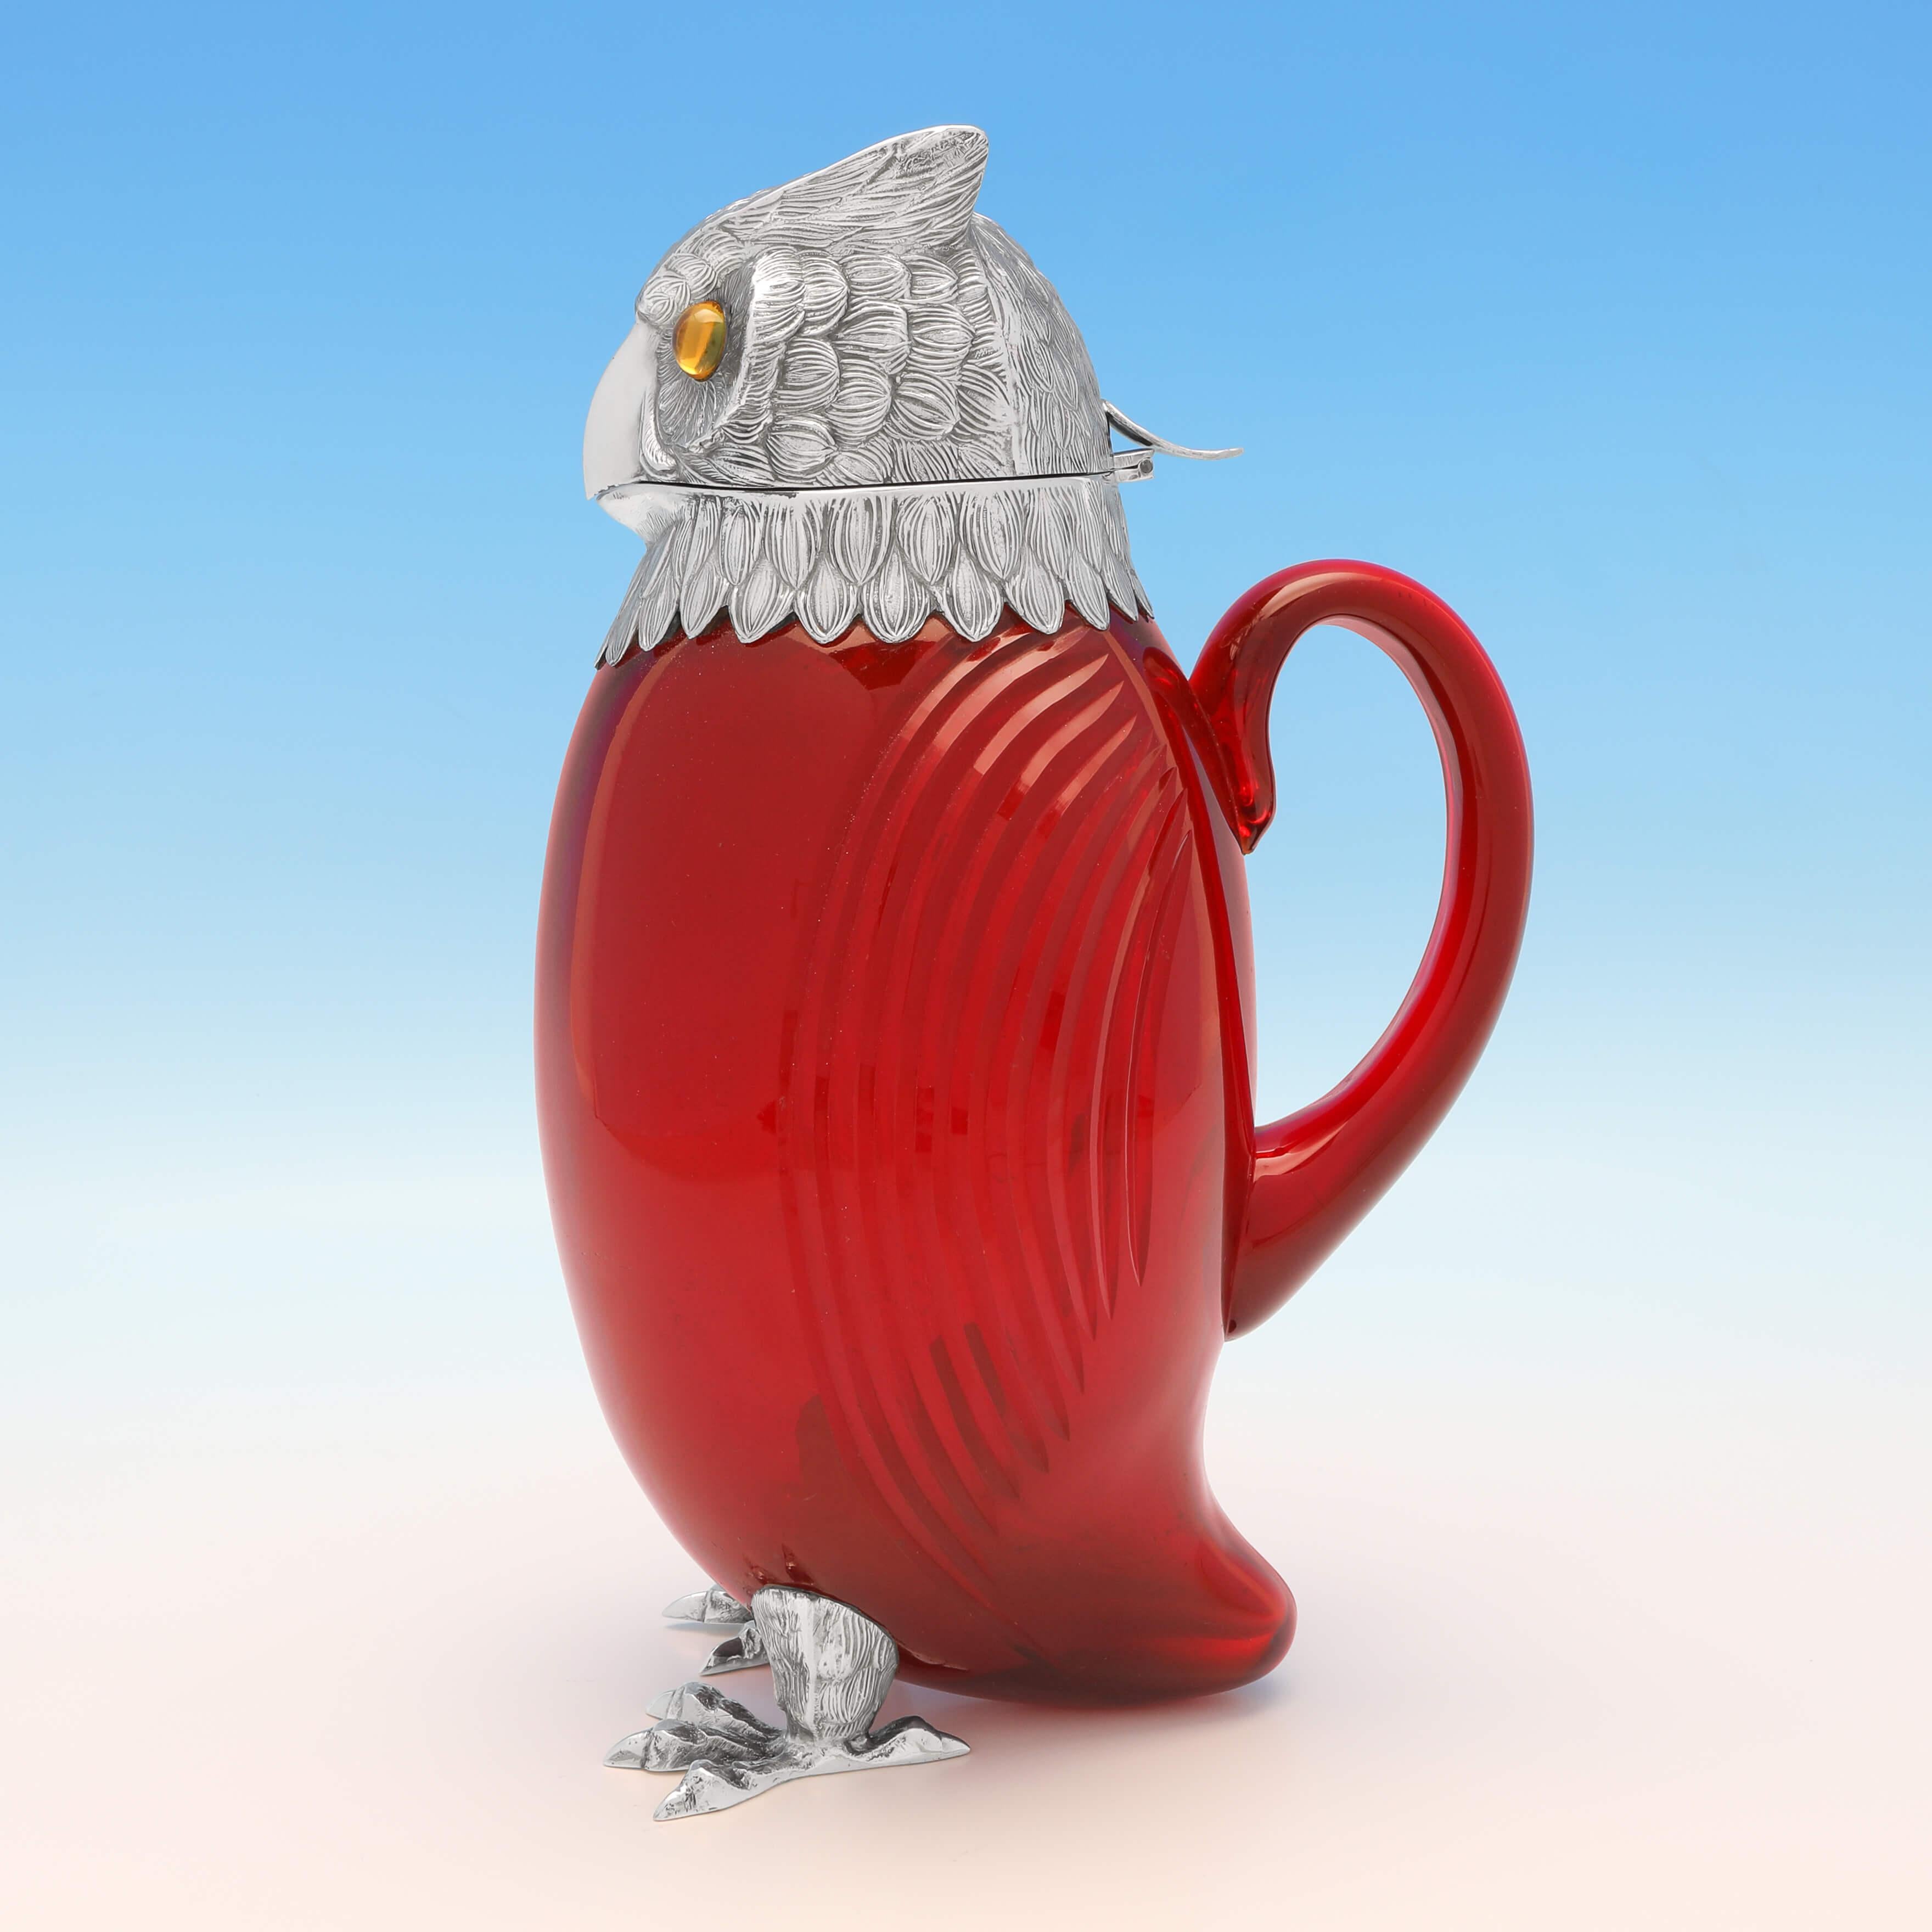 Carrying import marks for London in 1972 by I. Freeman & Sons, this highly unusual, Elizabeth II, sterling silver claret jug, is modelled to look like an owl, with a red glass body and amber colored eyes. The claret jug measures 11